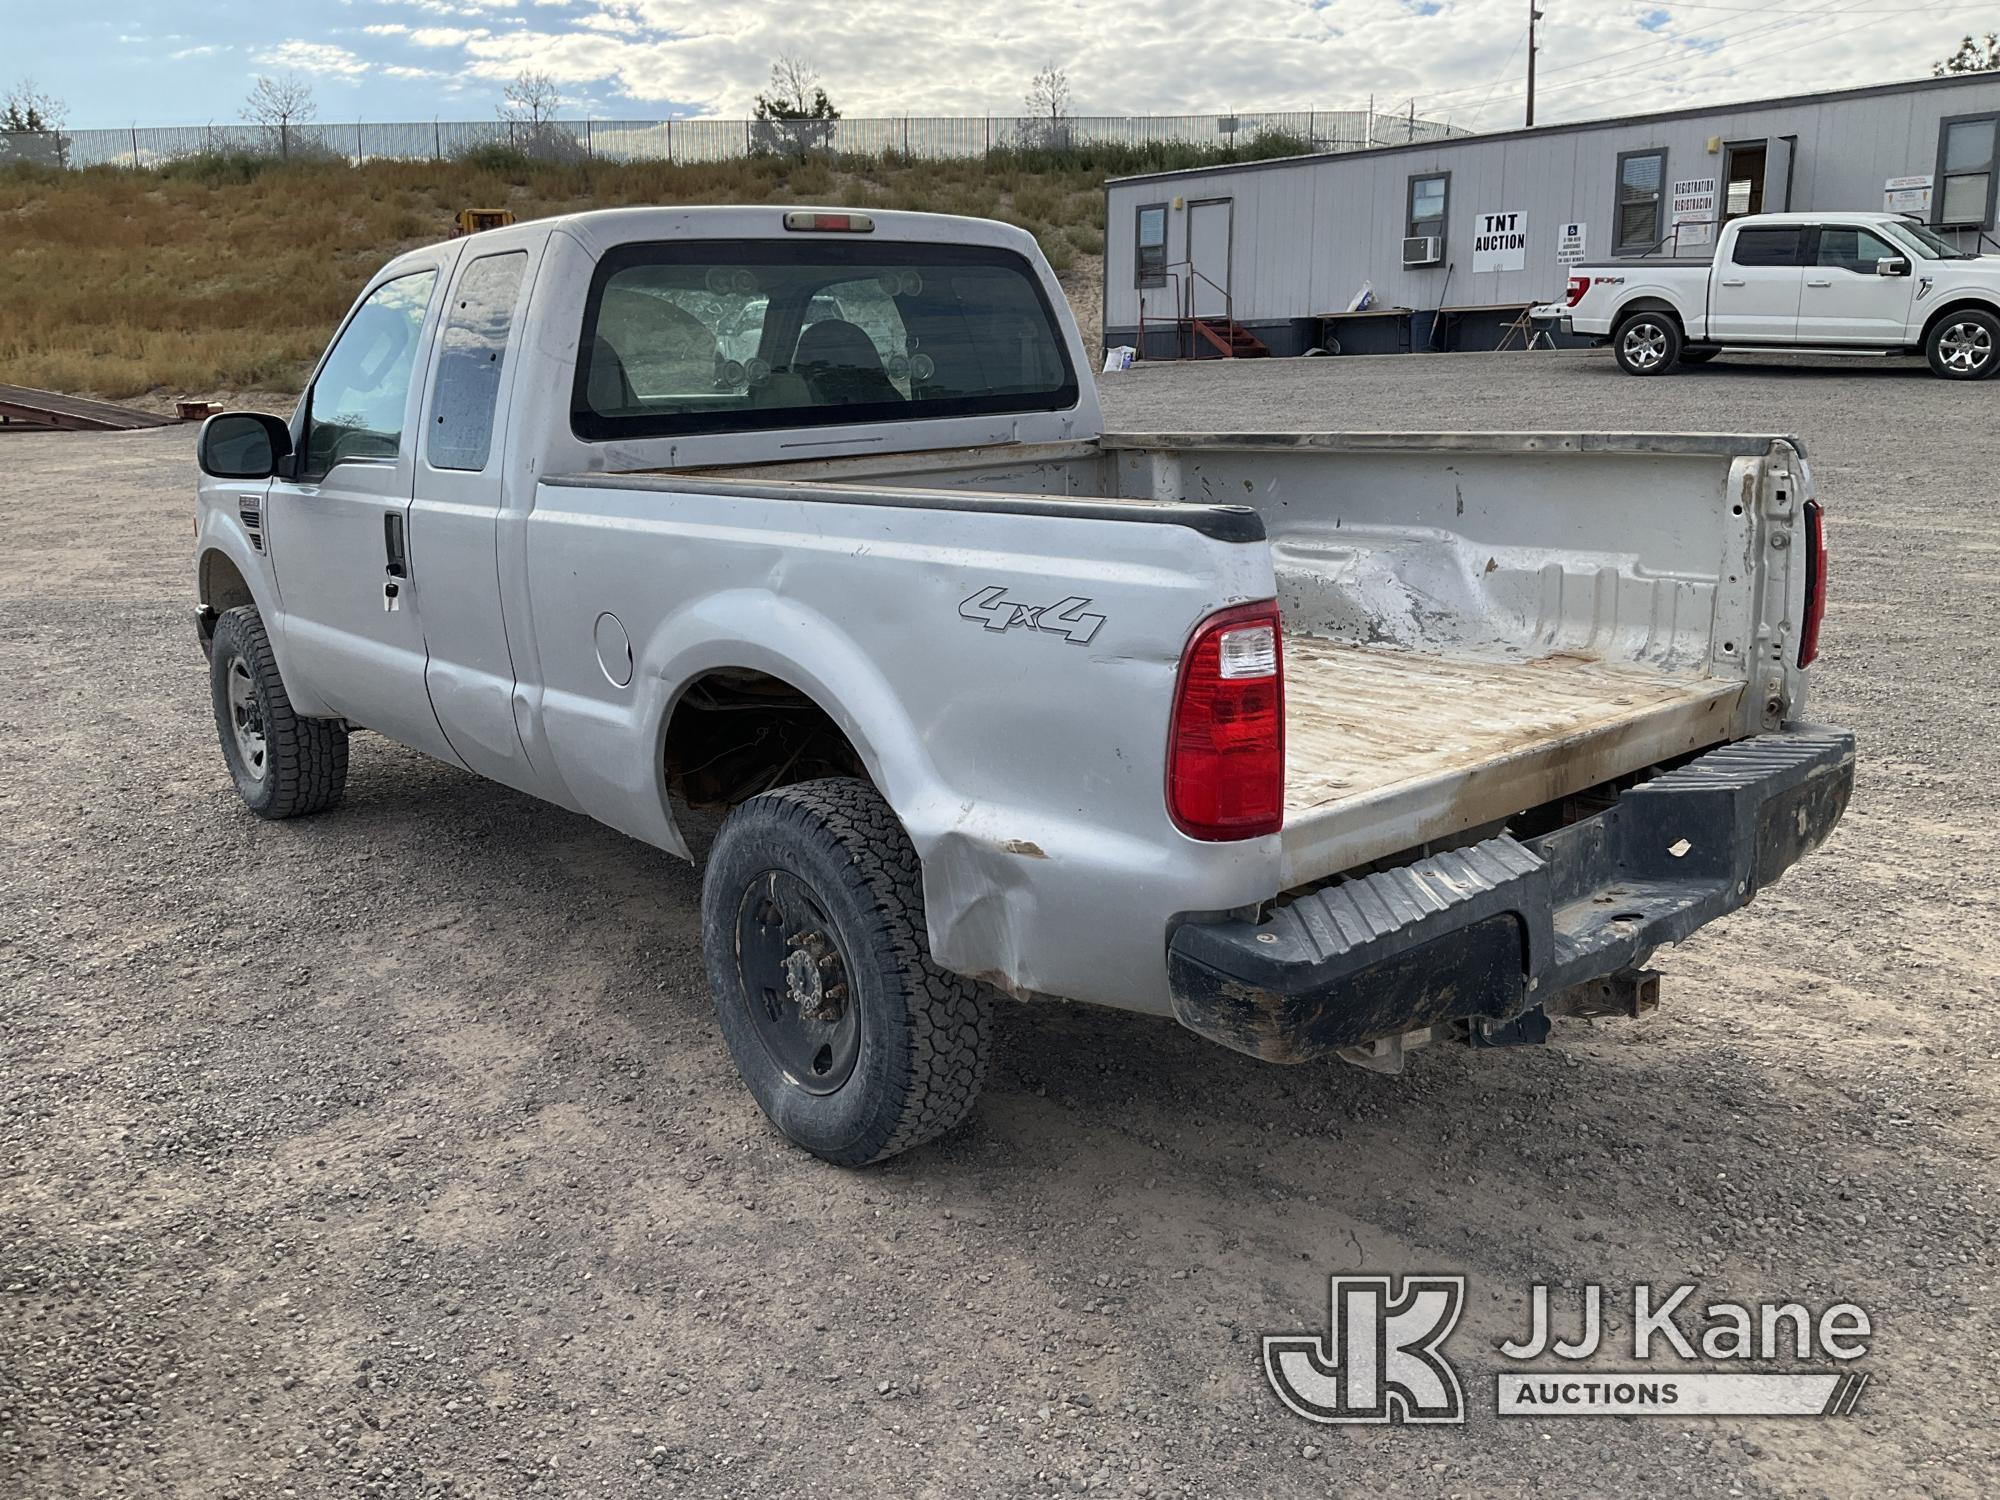 (McCarran, NV) 2008 Ford F250 4x4 Extended-Cab Pickup Truck, Taxable Item Located In Reno Nv. Contac